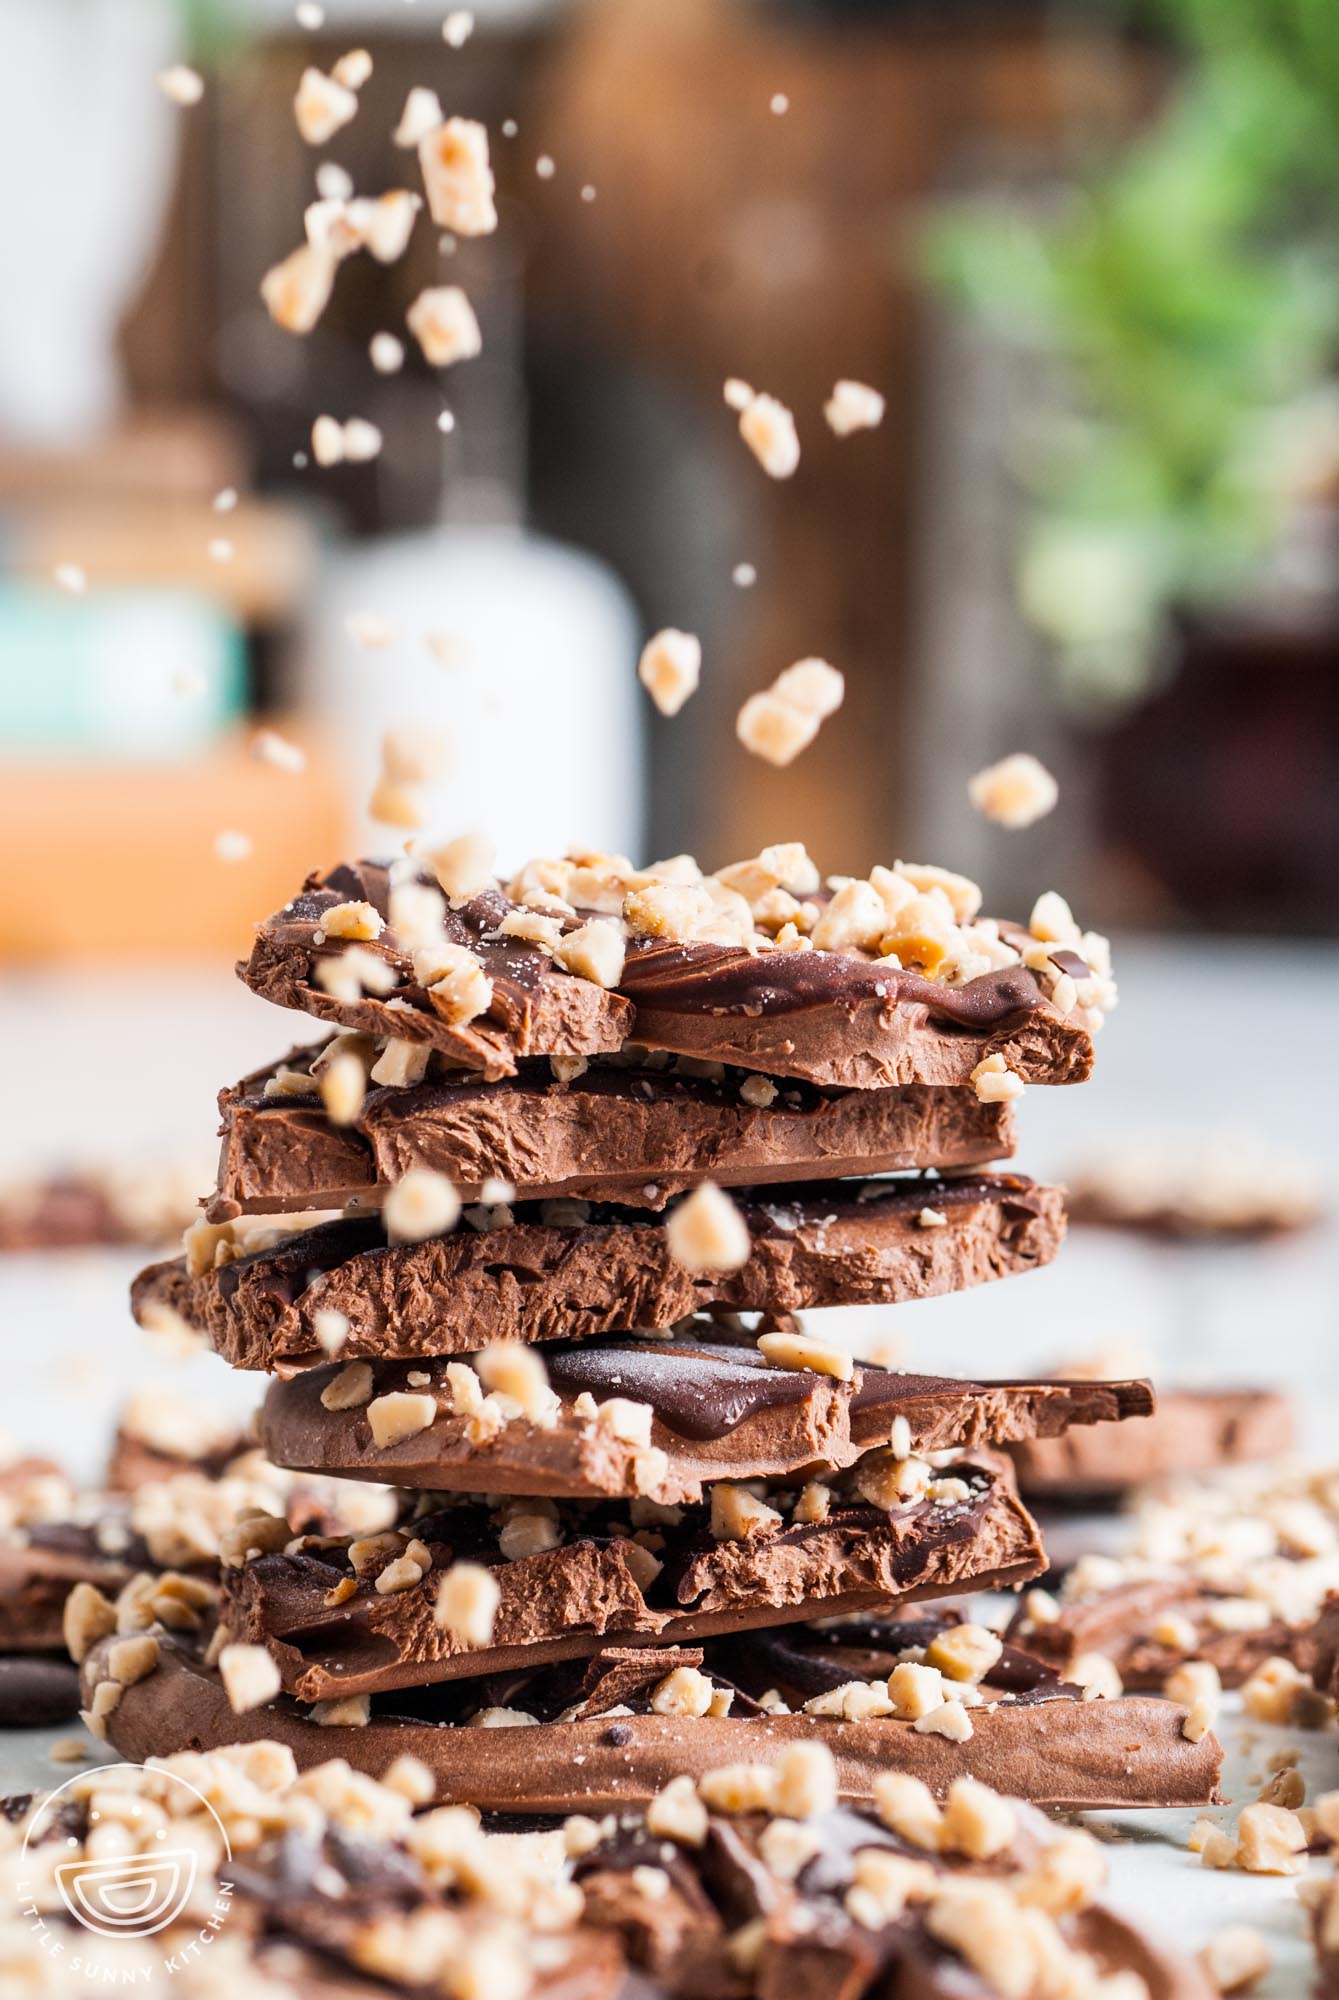 a stack of chocolate frozen yogurt bark pieces. Toffee bits are being sprinkled over them.